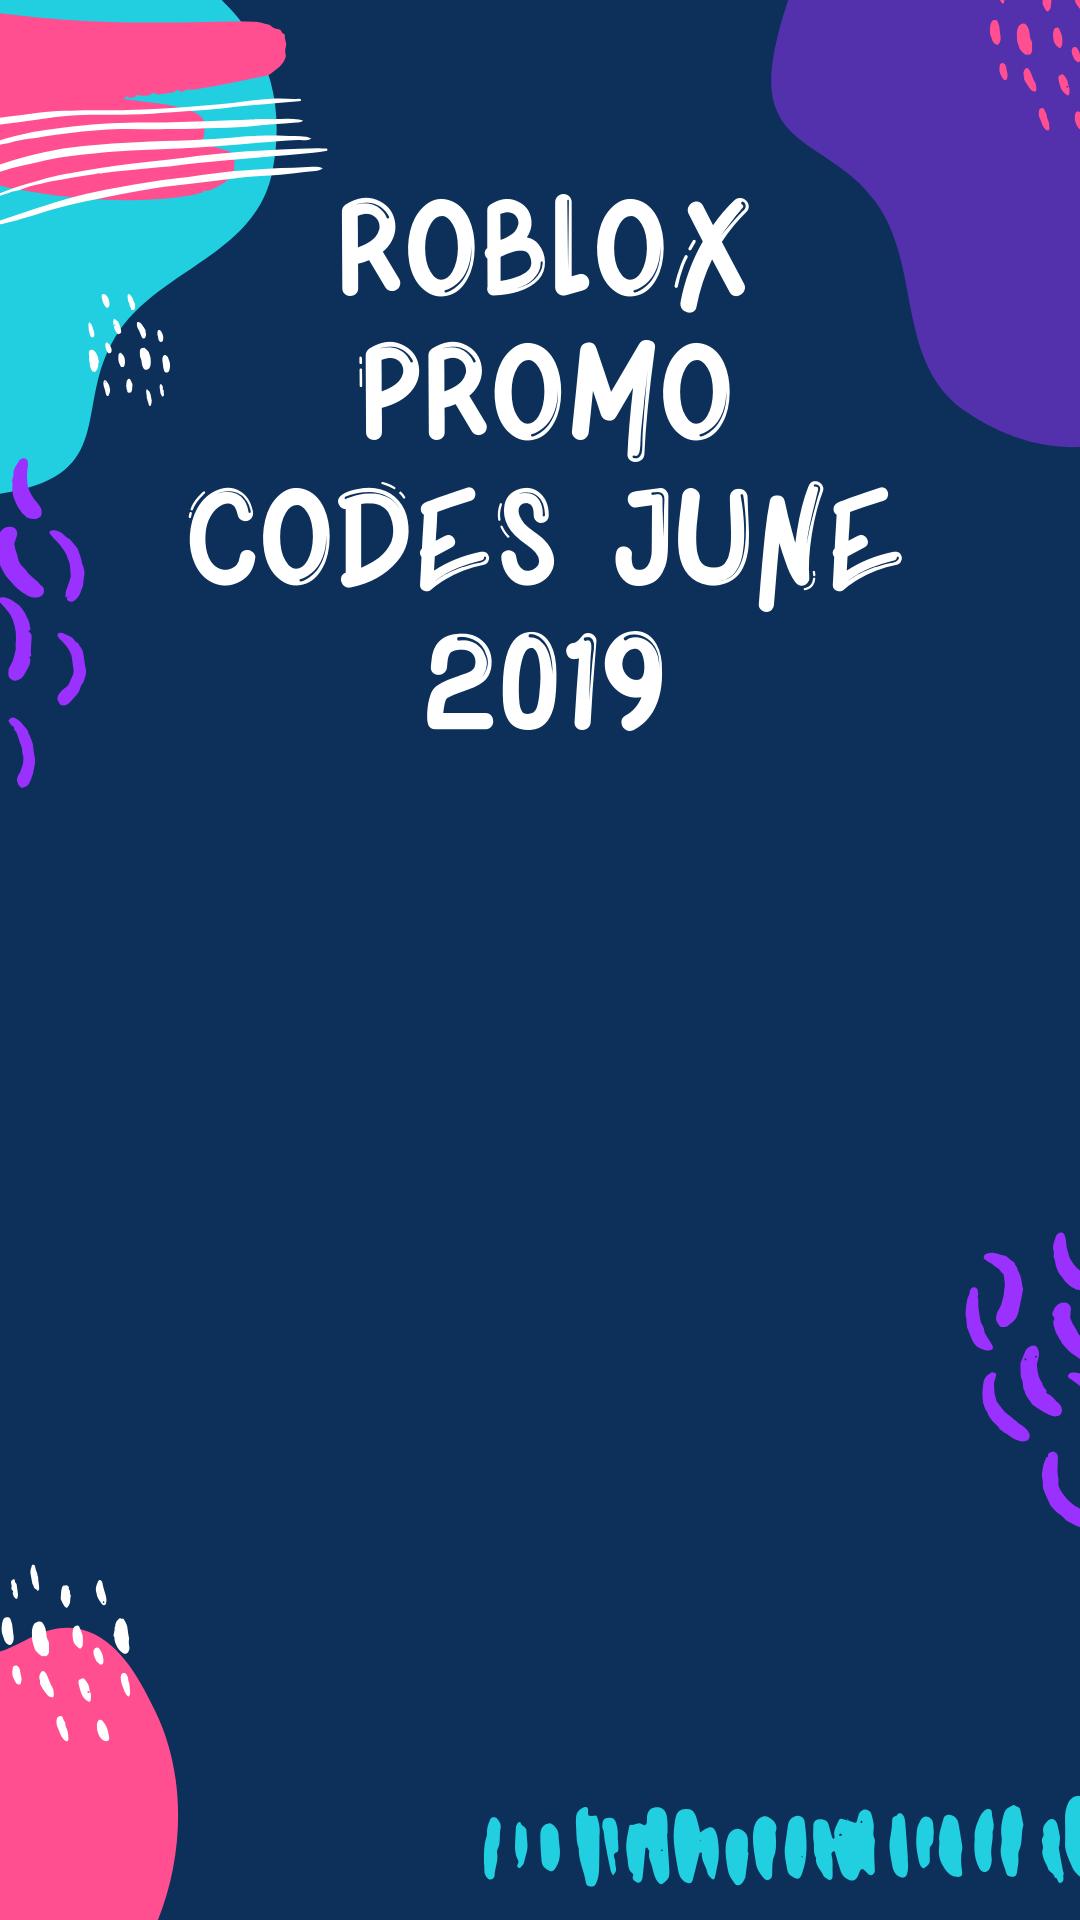 Roblox Promo Codes 2020 On Twitter Roblox Working Promo Code June 2019 Spider Cola Just Enter Promo Code Spidercola Click Here To Get All New Roblox Promo Codes Today S Link Https T Co Co1ltinps5 Robloxnew - 2019 new june codes 2019 working roblox